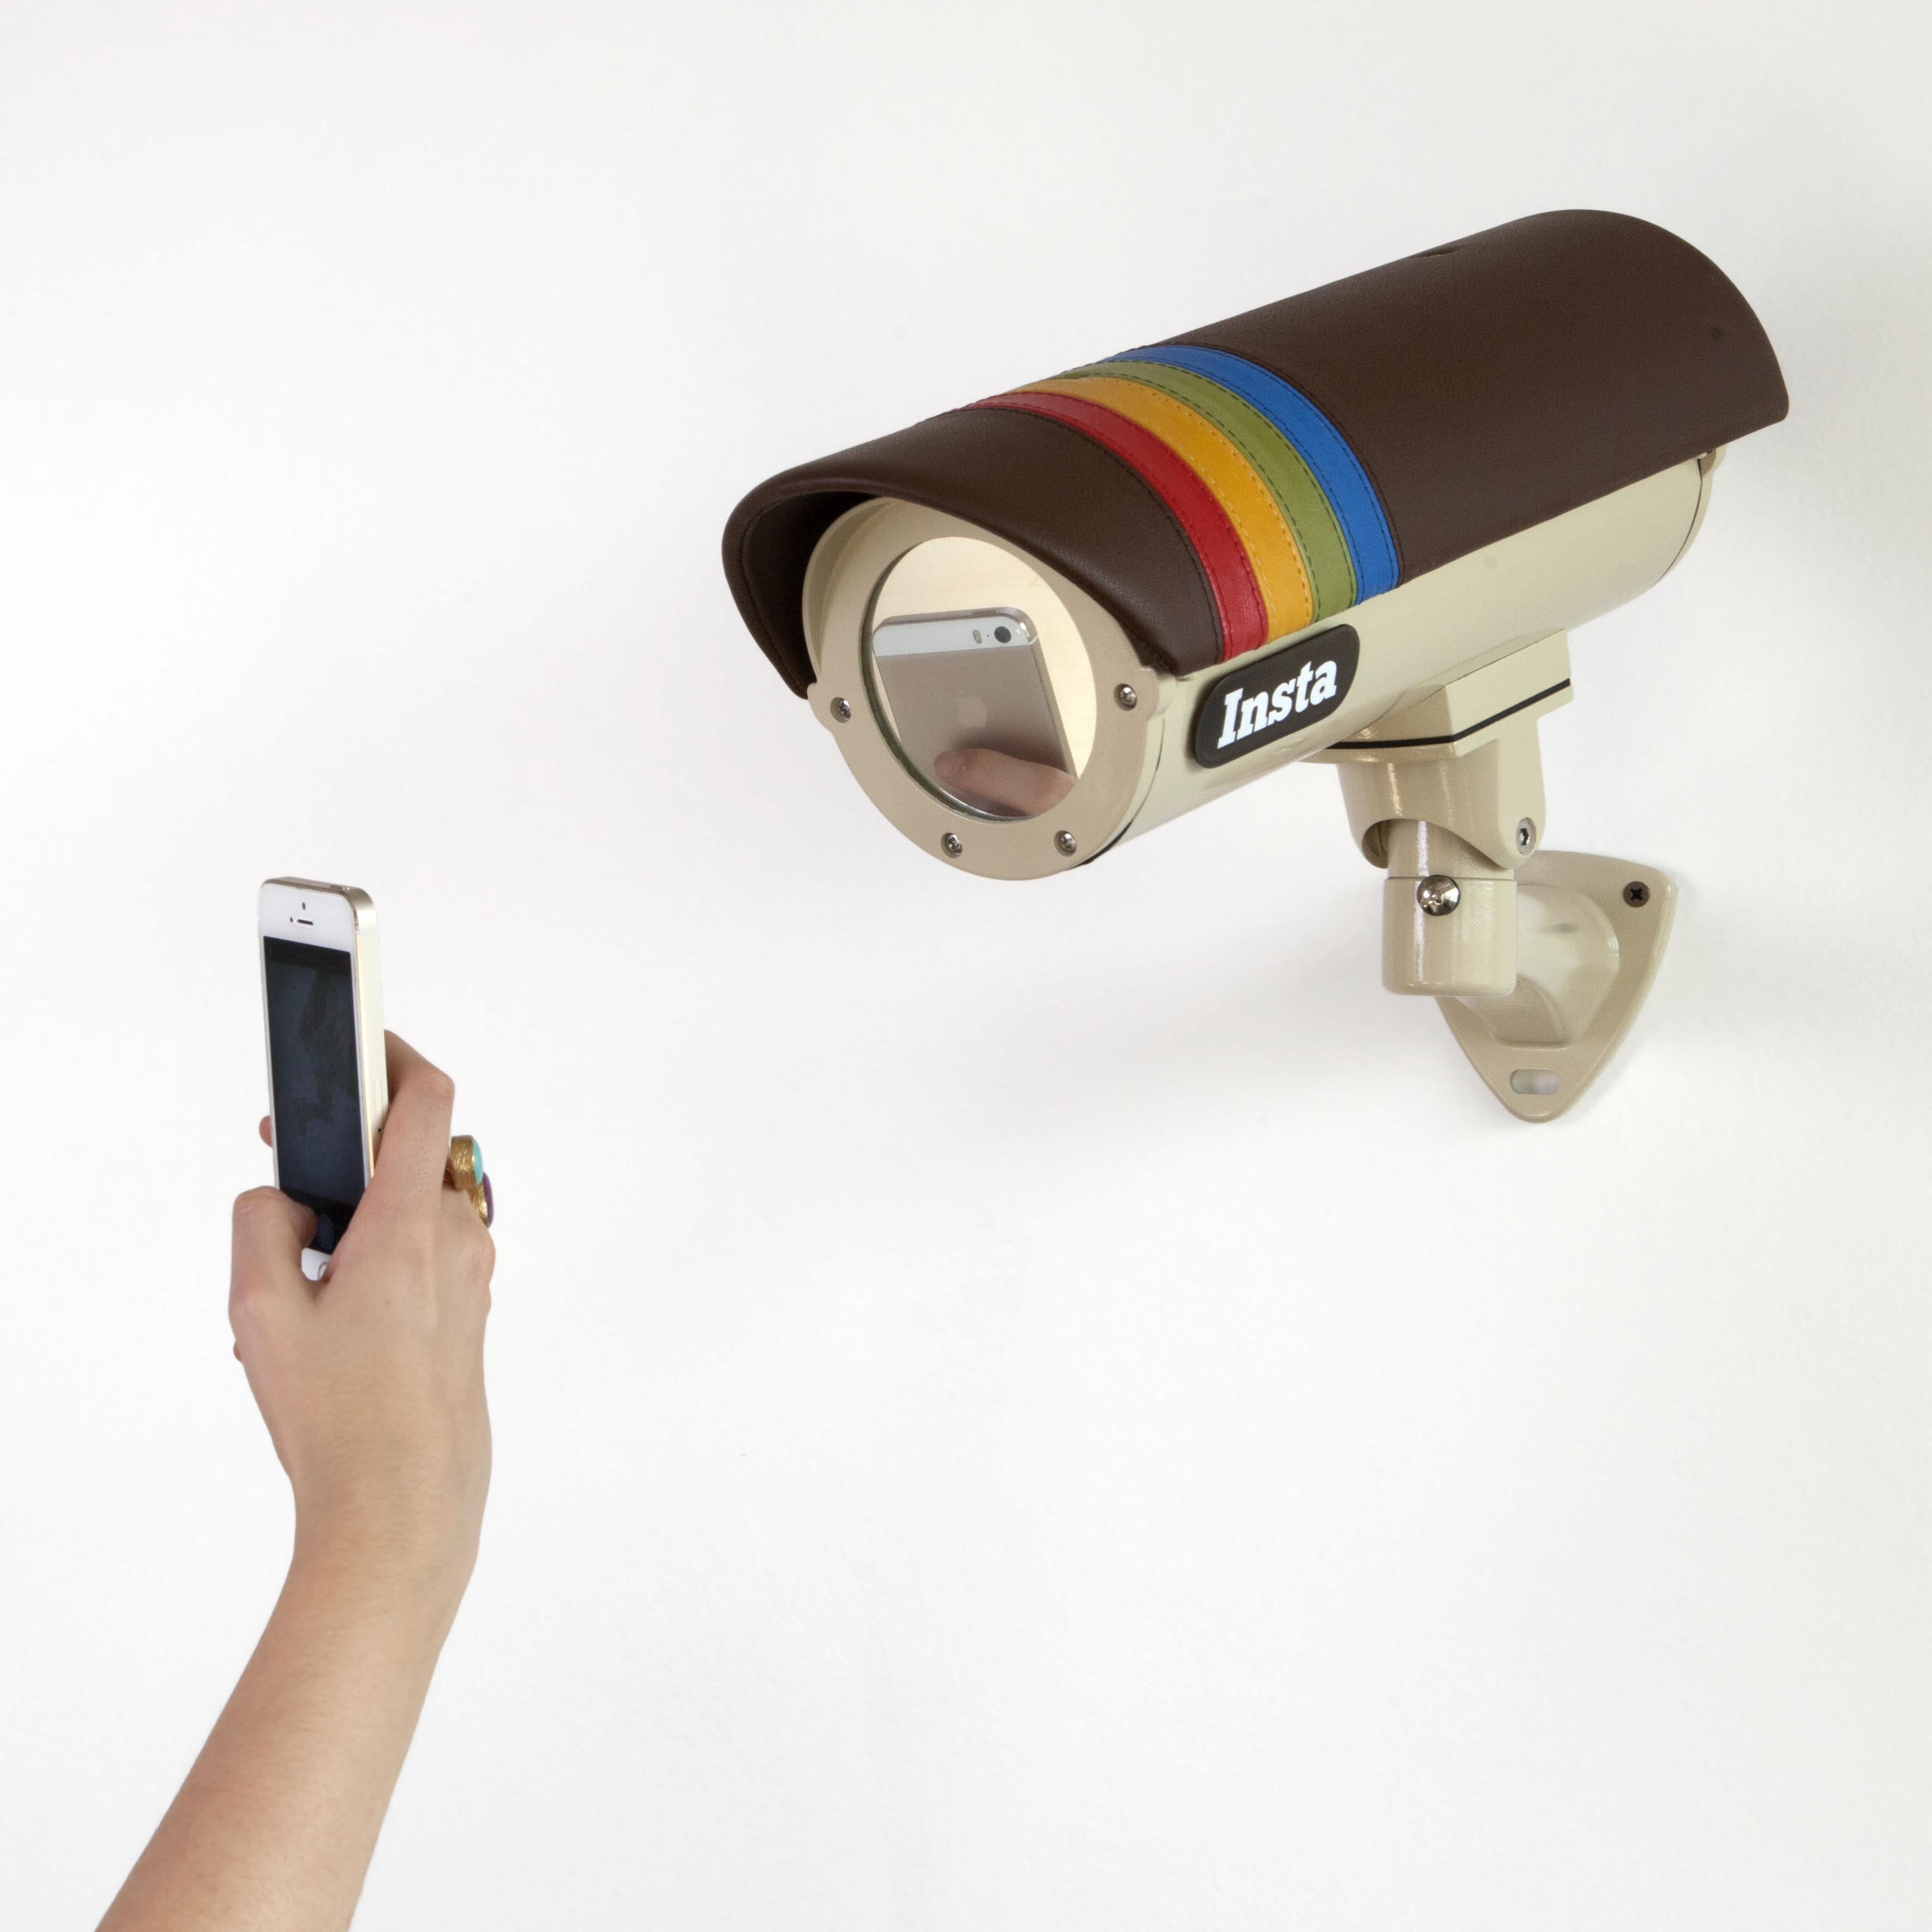 Fidia Falaschetti, Social Security Camera – Instagram, IED, NOT AN ARTIST Los Angeles